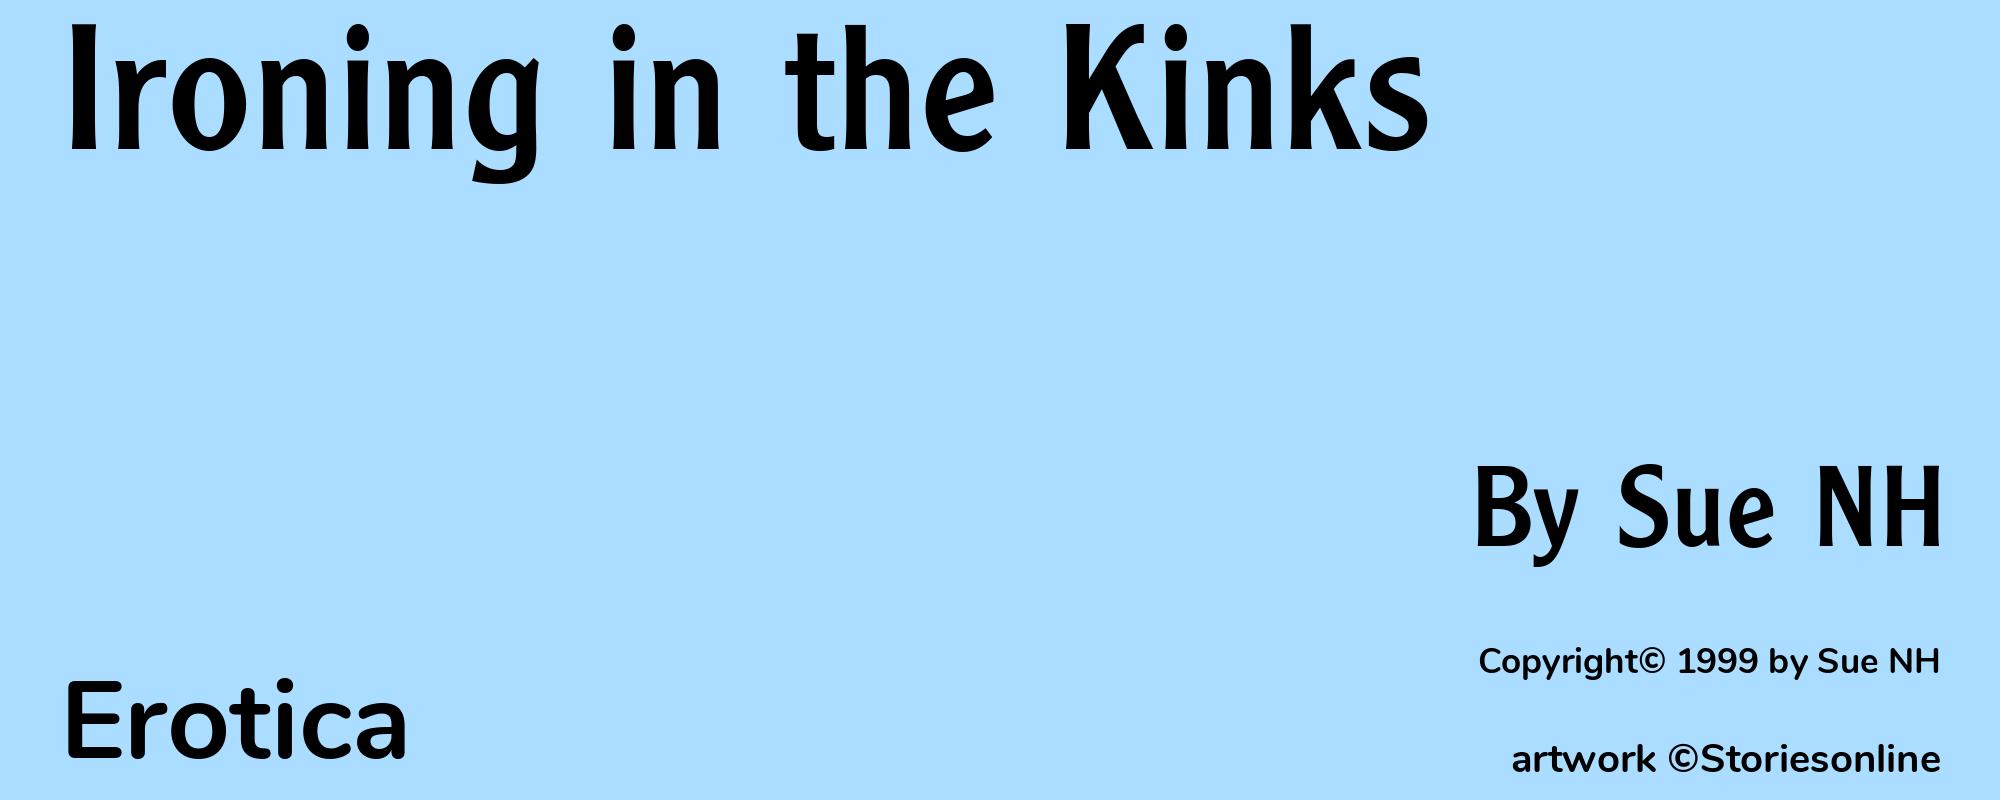 Ironing in the Kinks - Cover